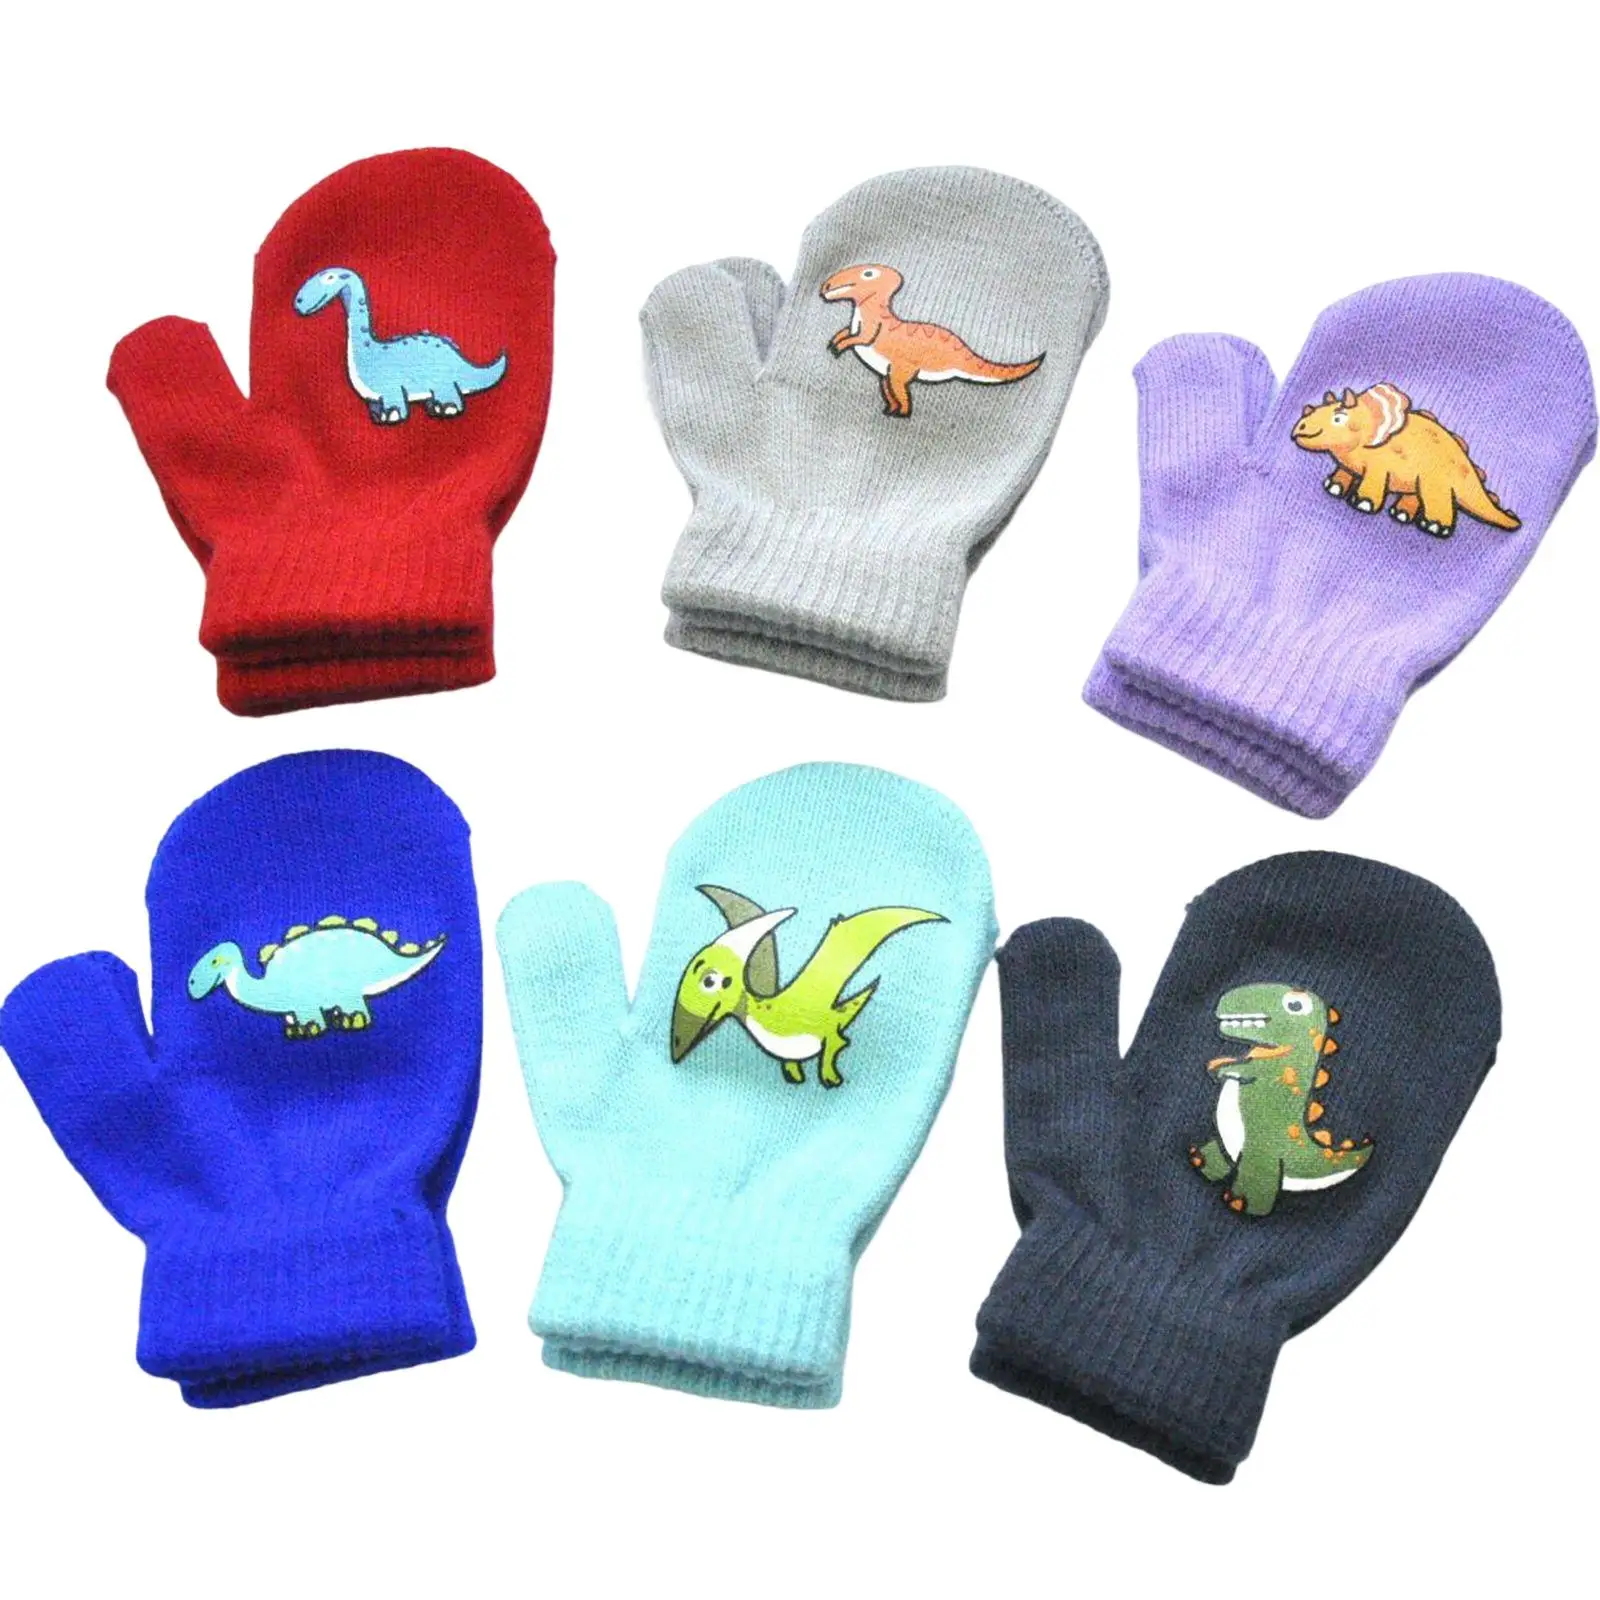 6 Pairs Kids Winter Gloves Stretch Knitted for Boys Girls Reusable Assorted color Appearance Comfortable to Wear Warm